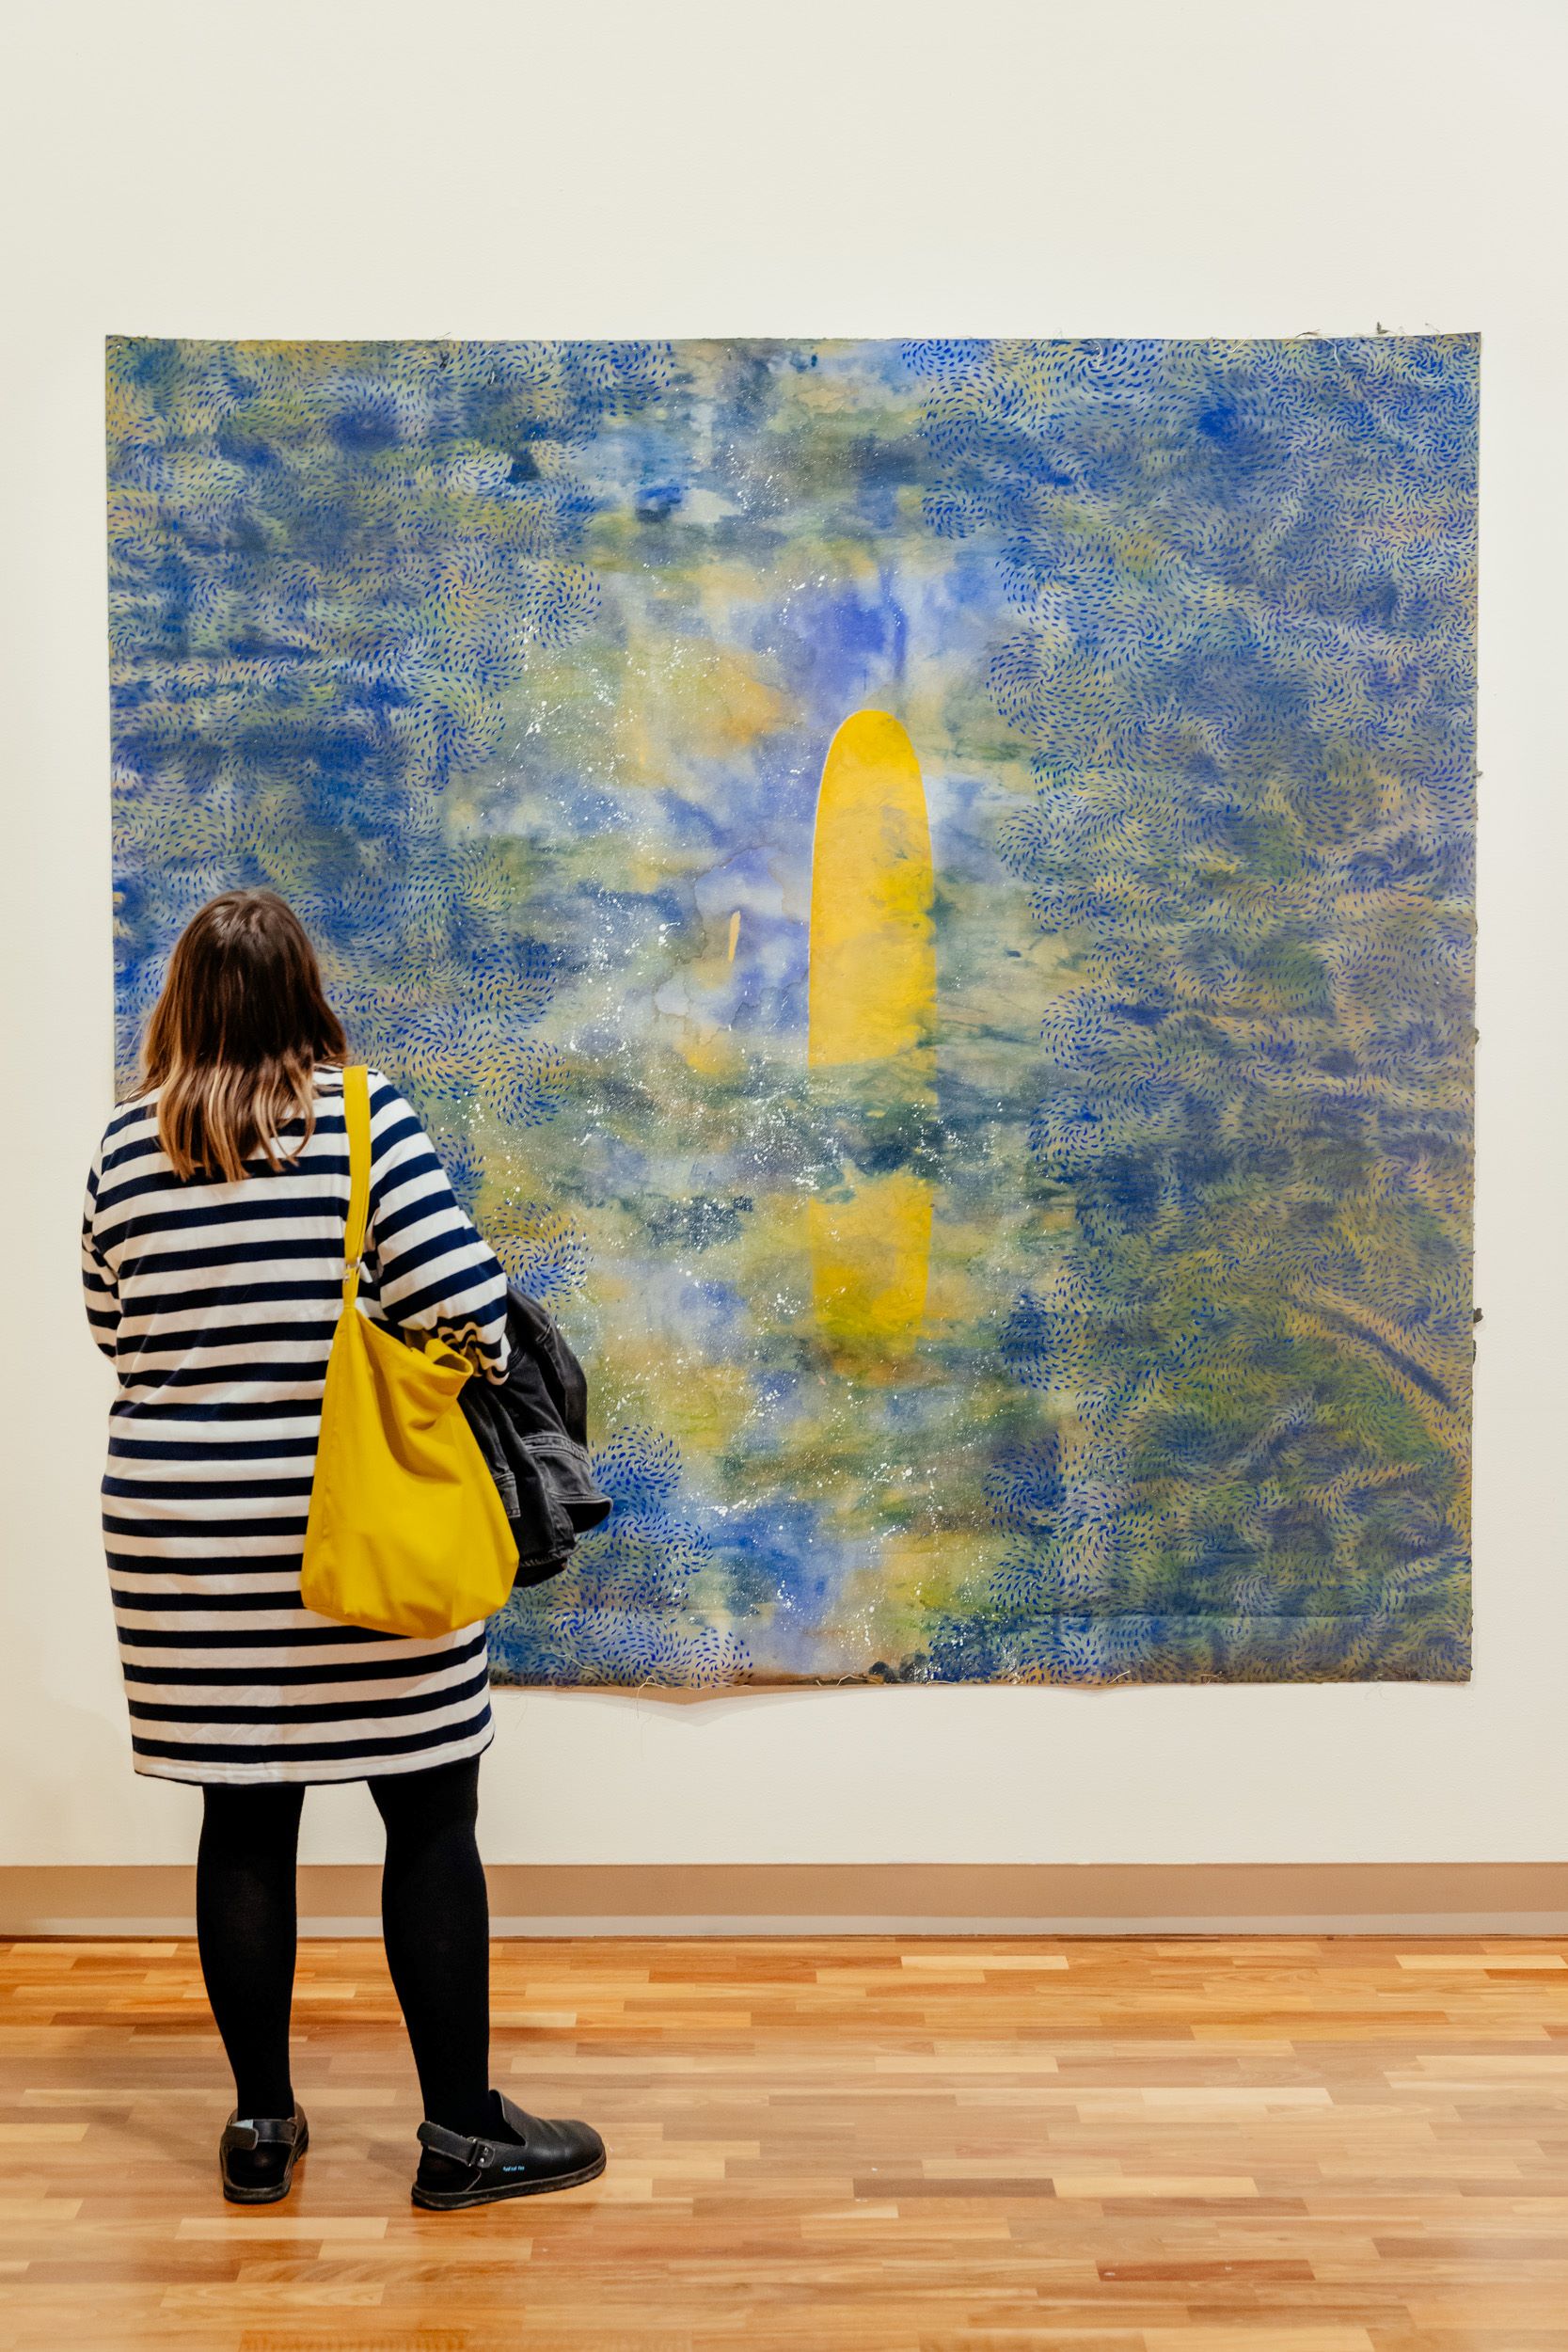 A person views a painting by Judy Watson